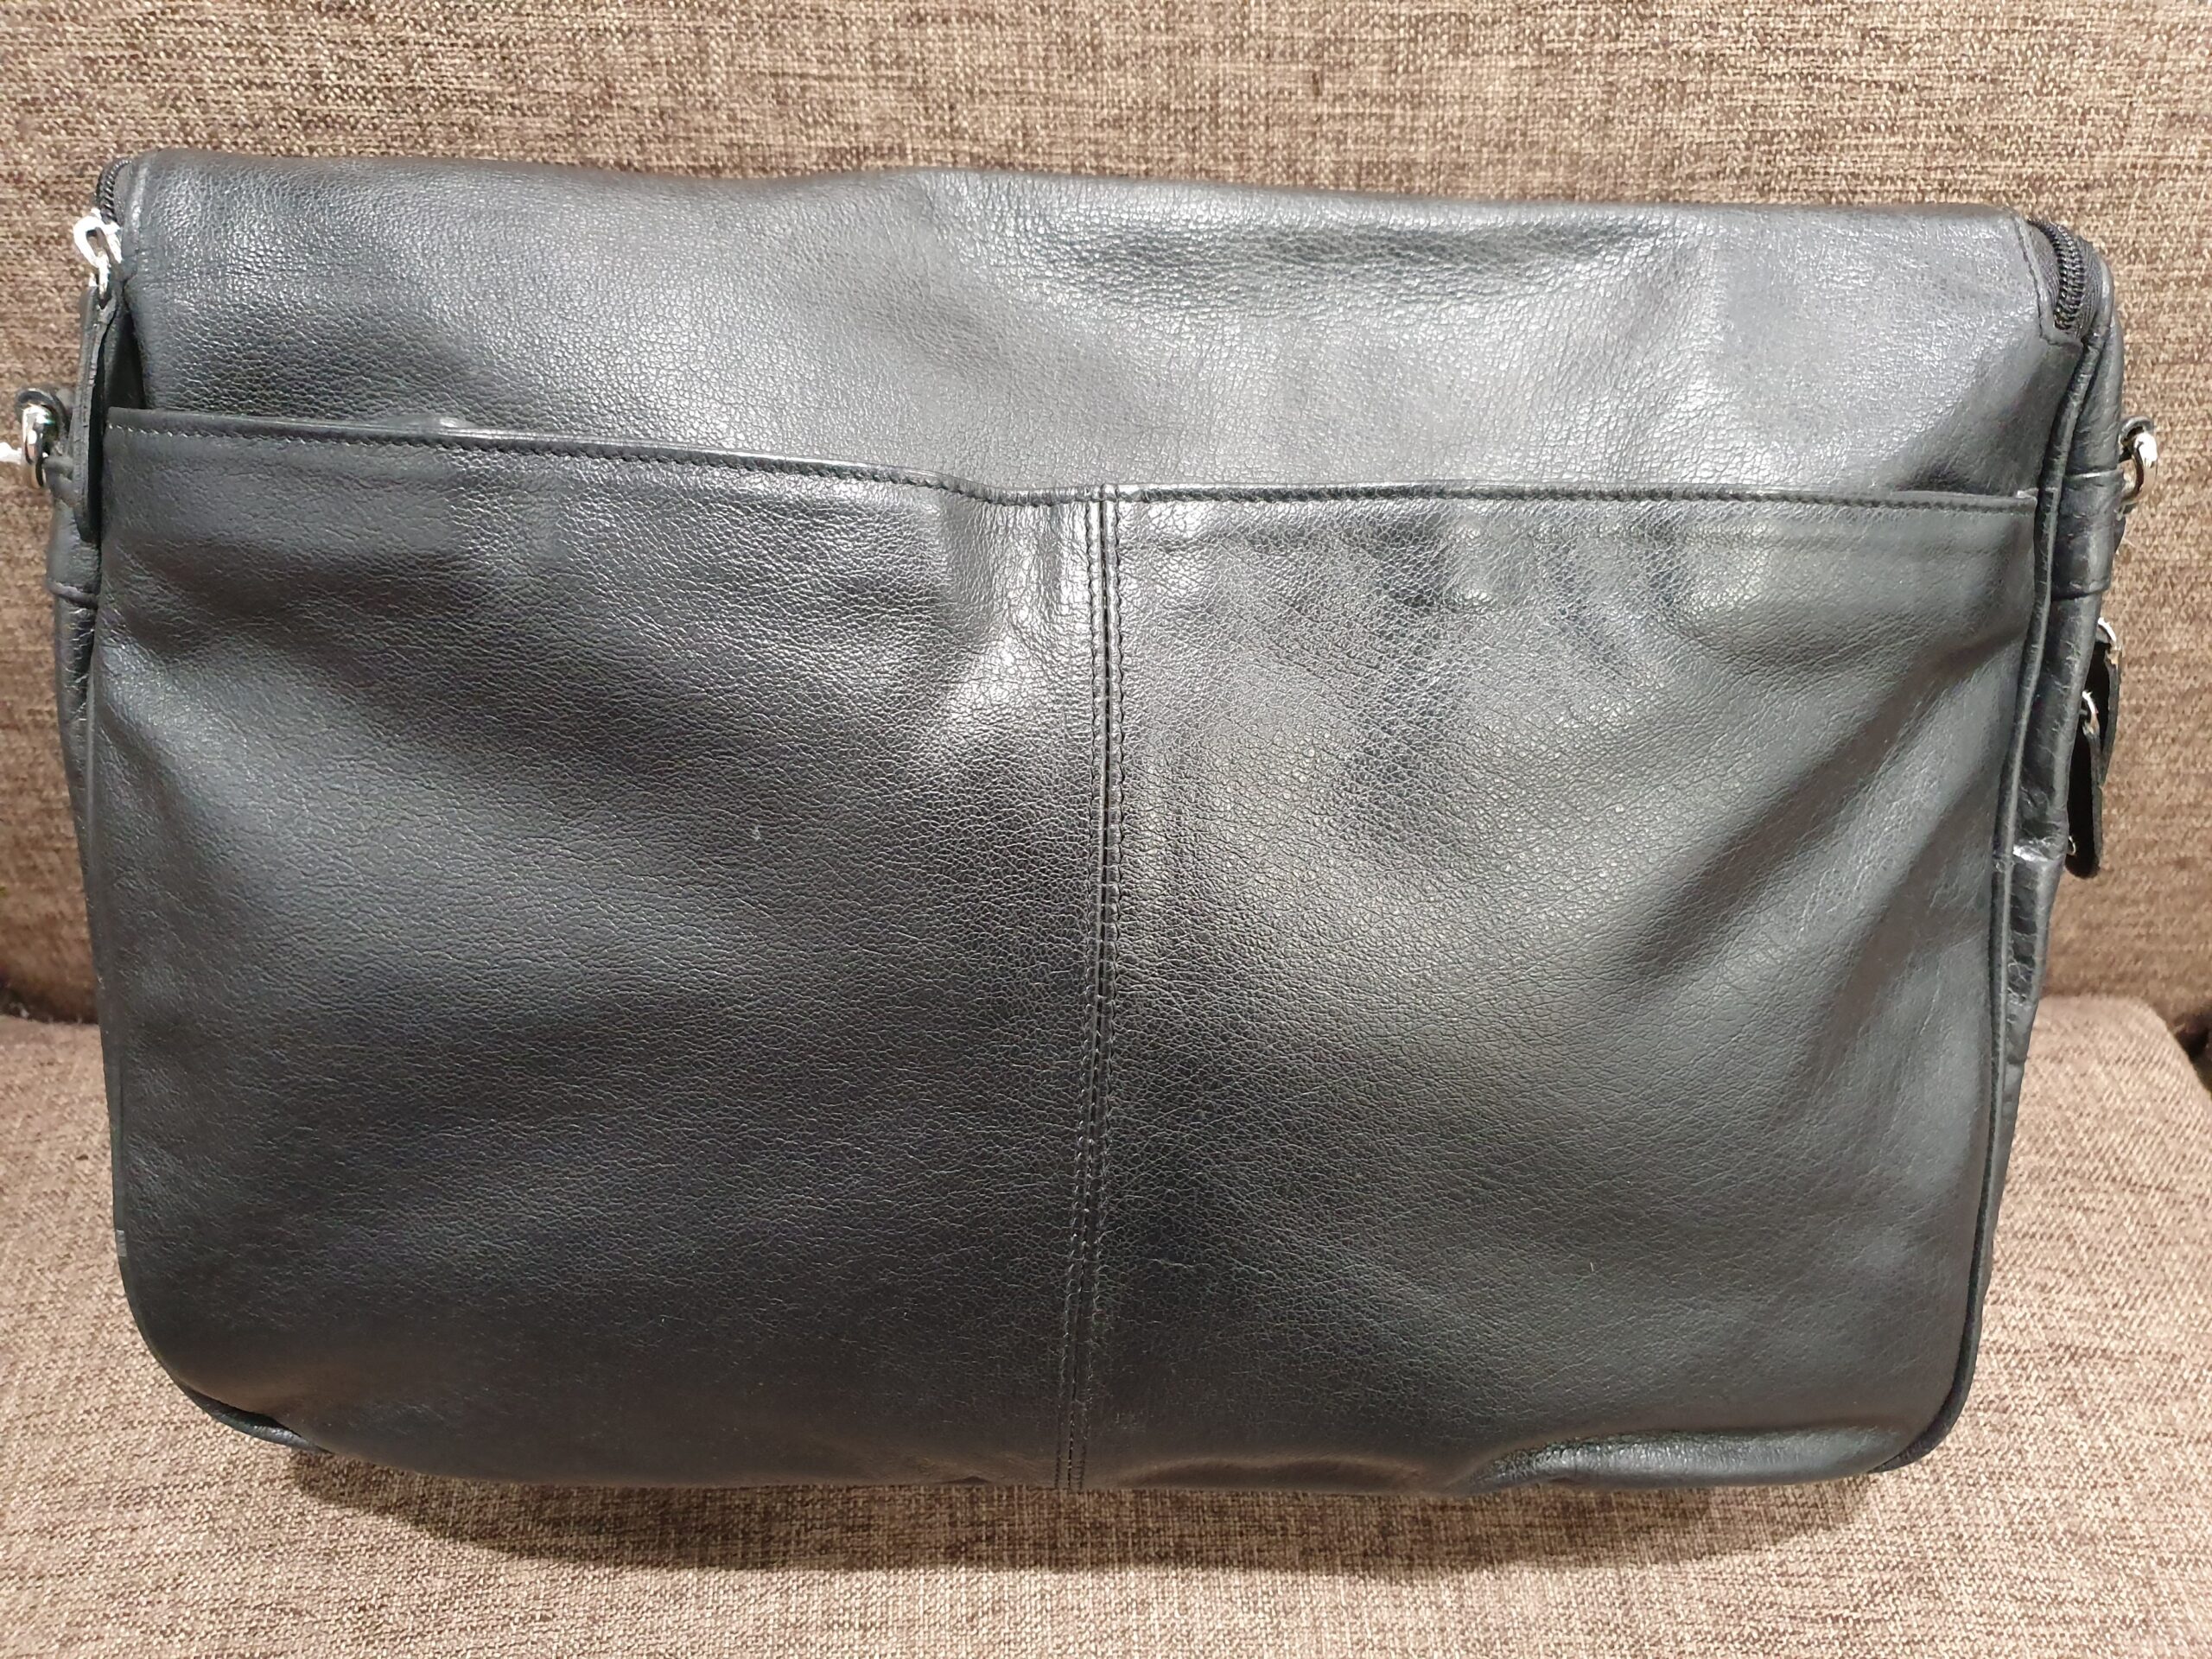 Cobb & Co Black Leather Bag - Leather Direct